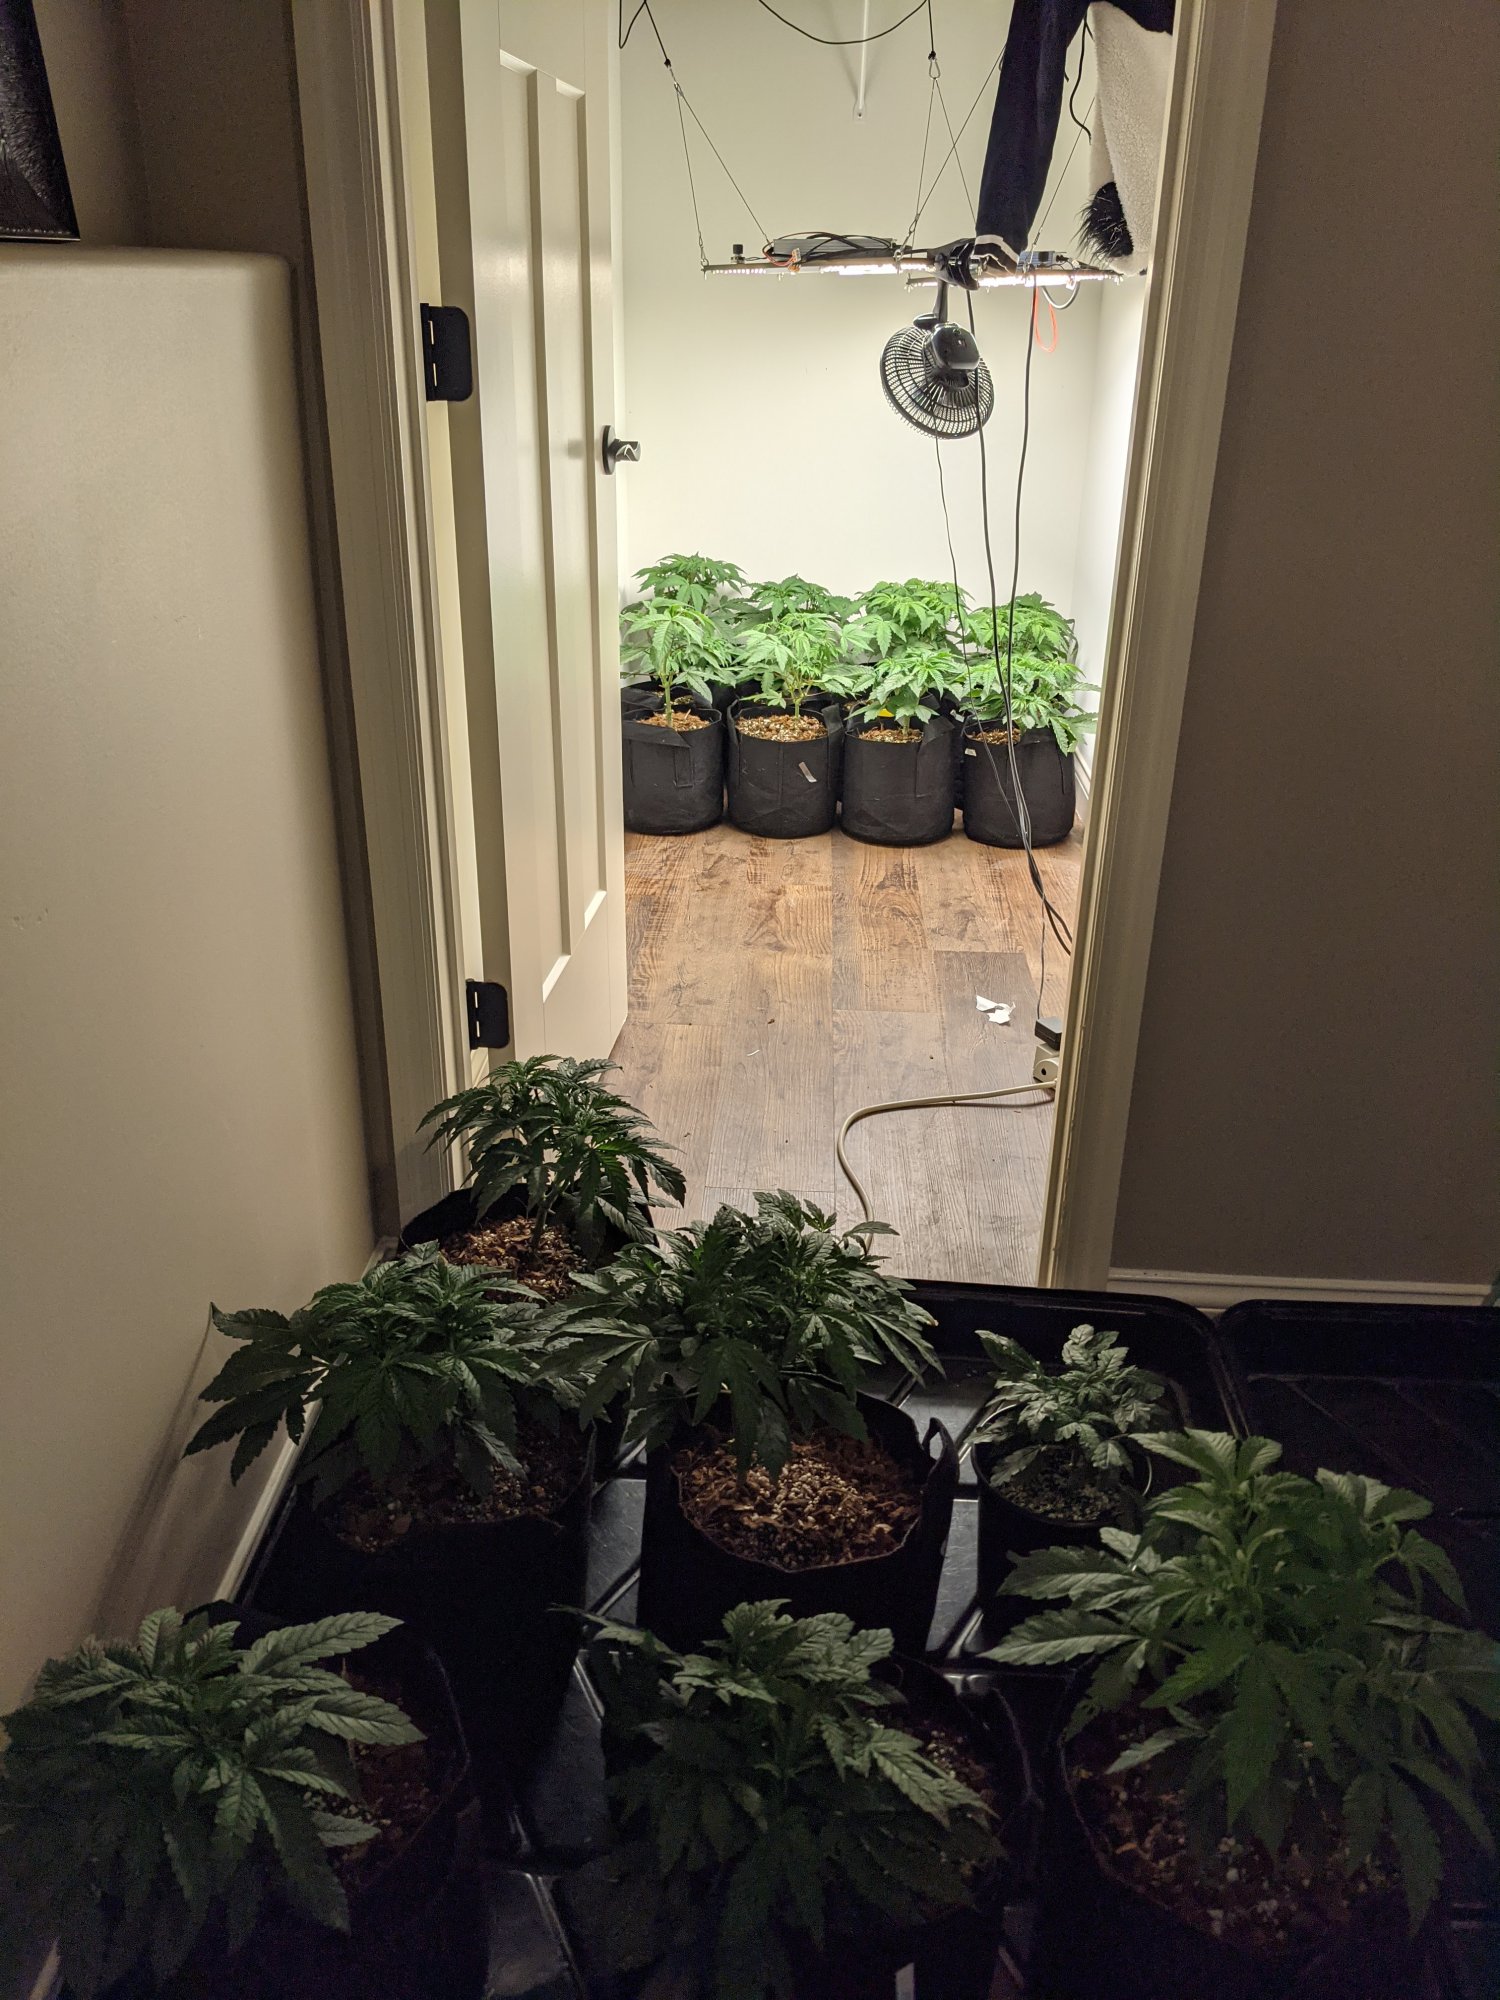 Second grow 8 strains in coco 3